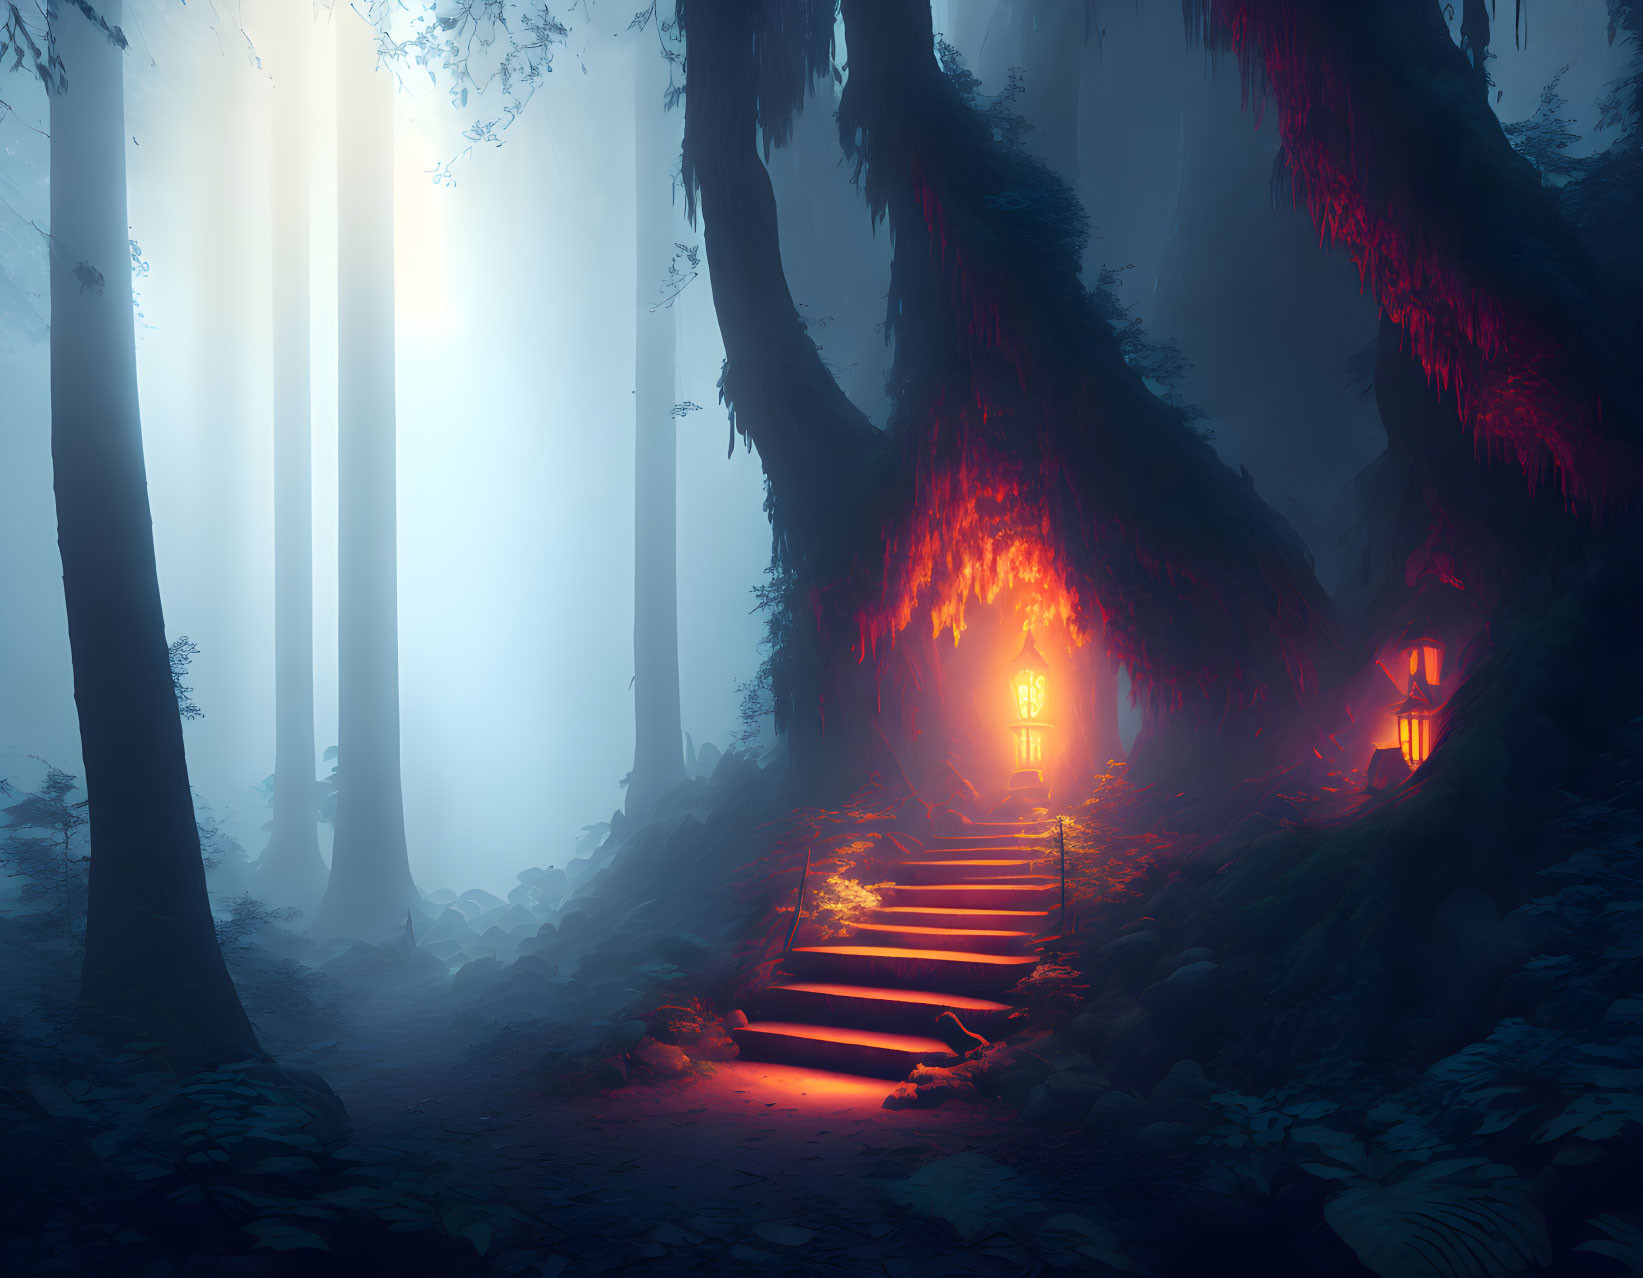 Enchanting forest scene with glowing lanterns on staircase around ancient tree